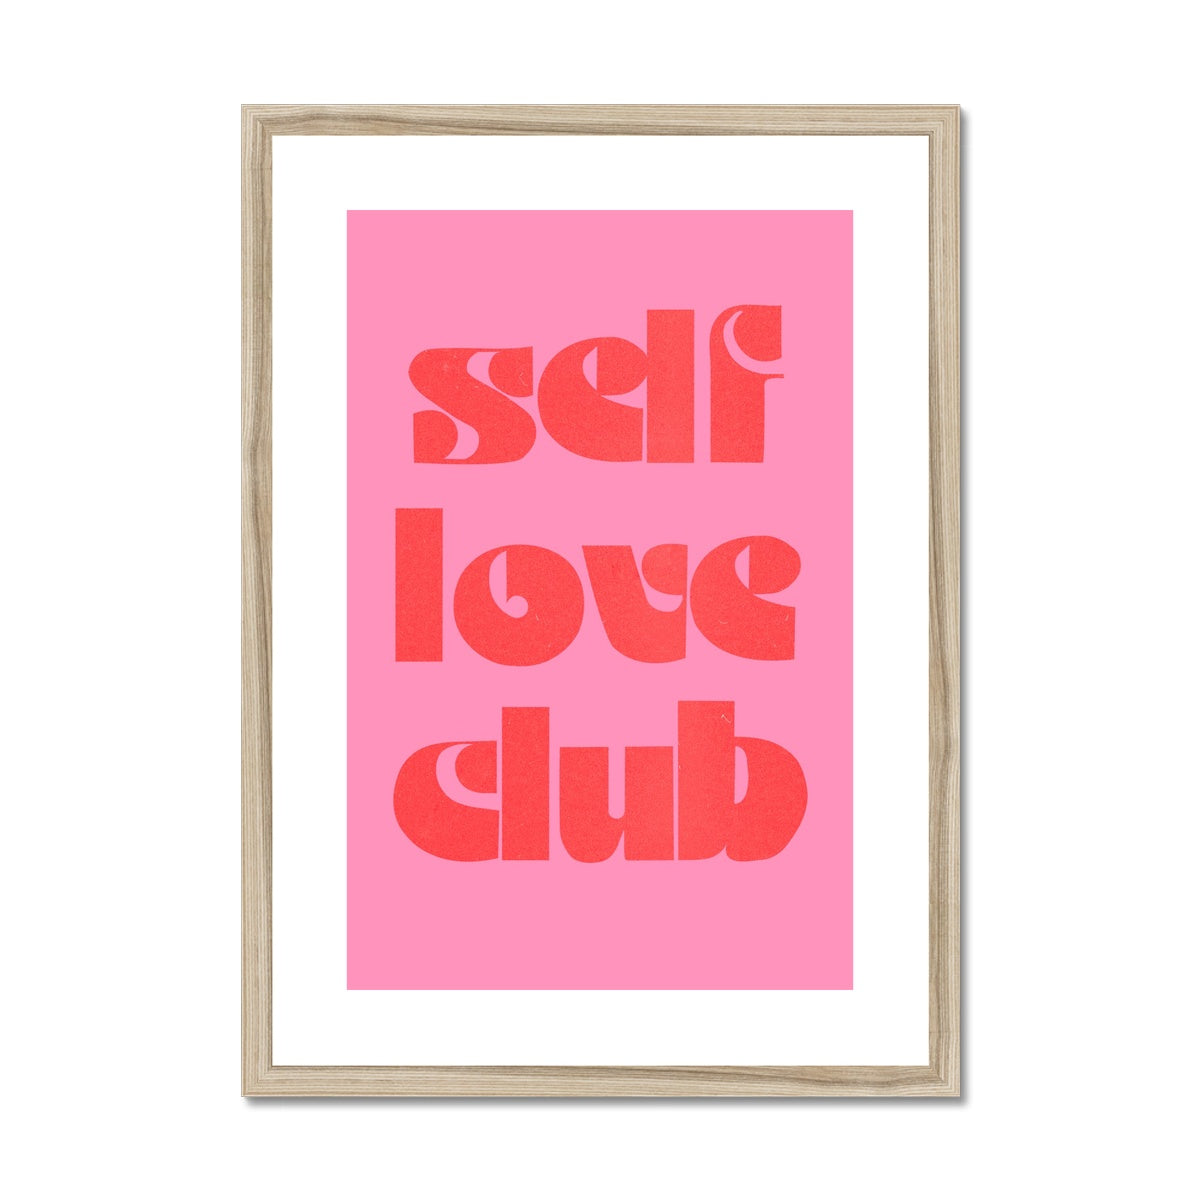 © les muses / Cool vintage typography art prints drawing from 90s grunge, girly Y2K and groovy 70s aesthetics. Retro style wall art and funky posters for trendy apartment or dorm decor with a killer aesthetic.

